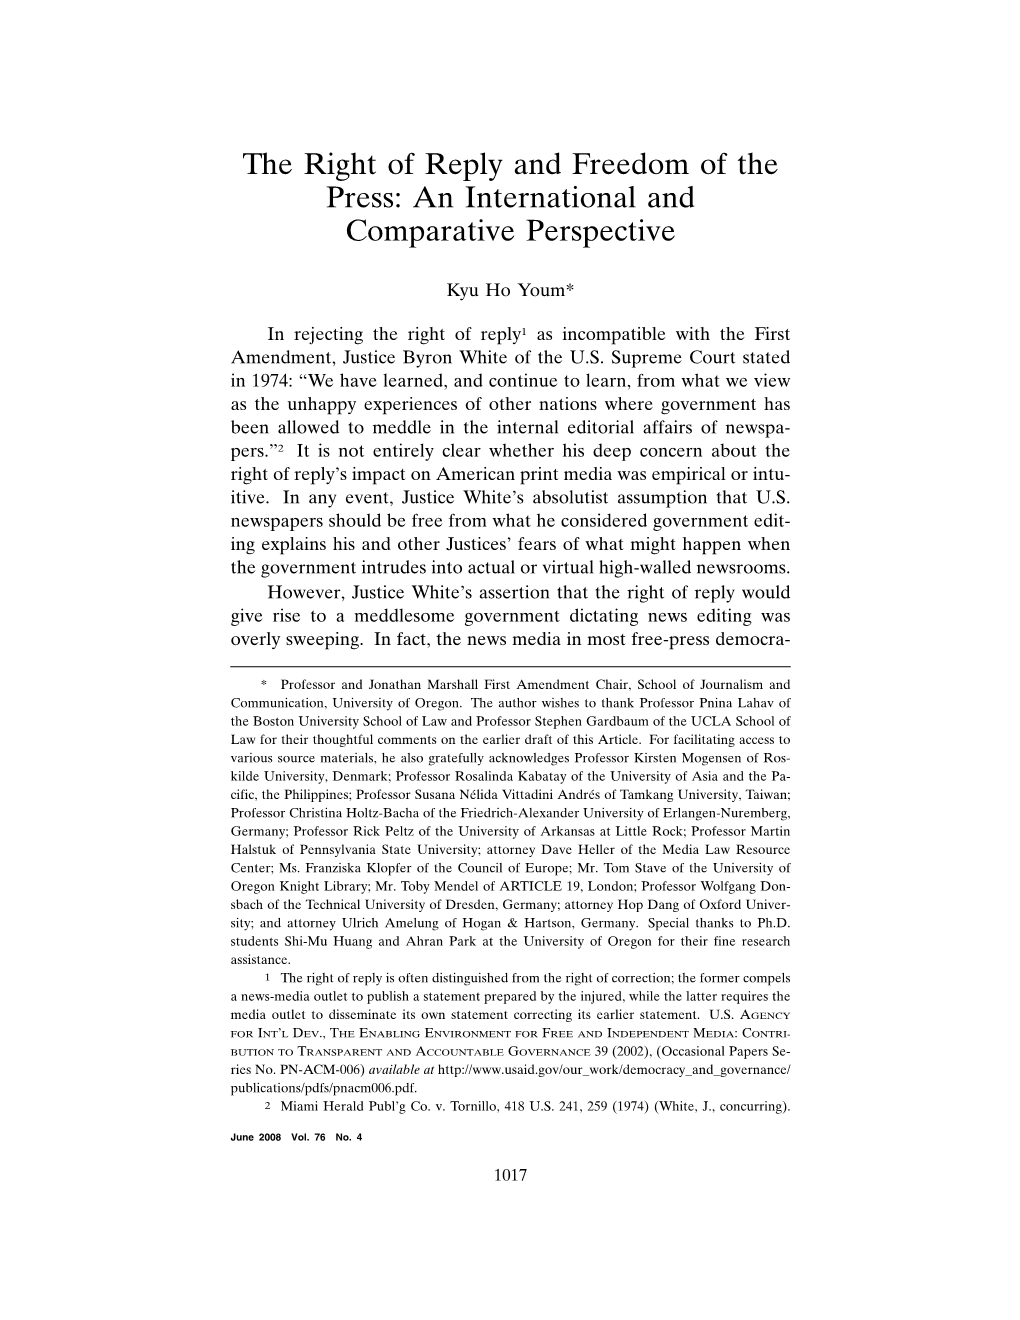 The Right of Reply and Freedom of the Press: an International and Comparative Perspective